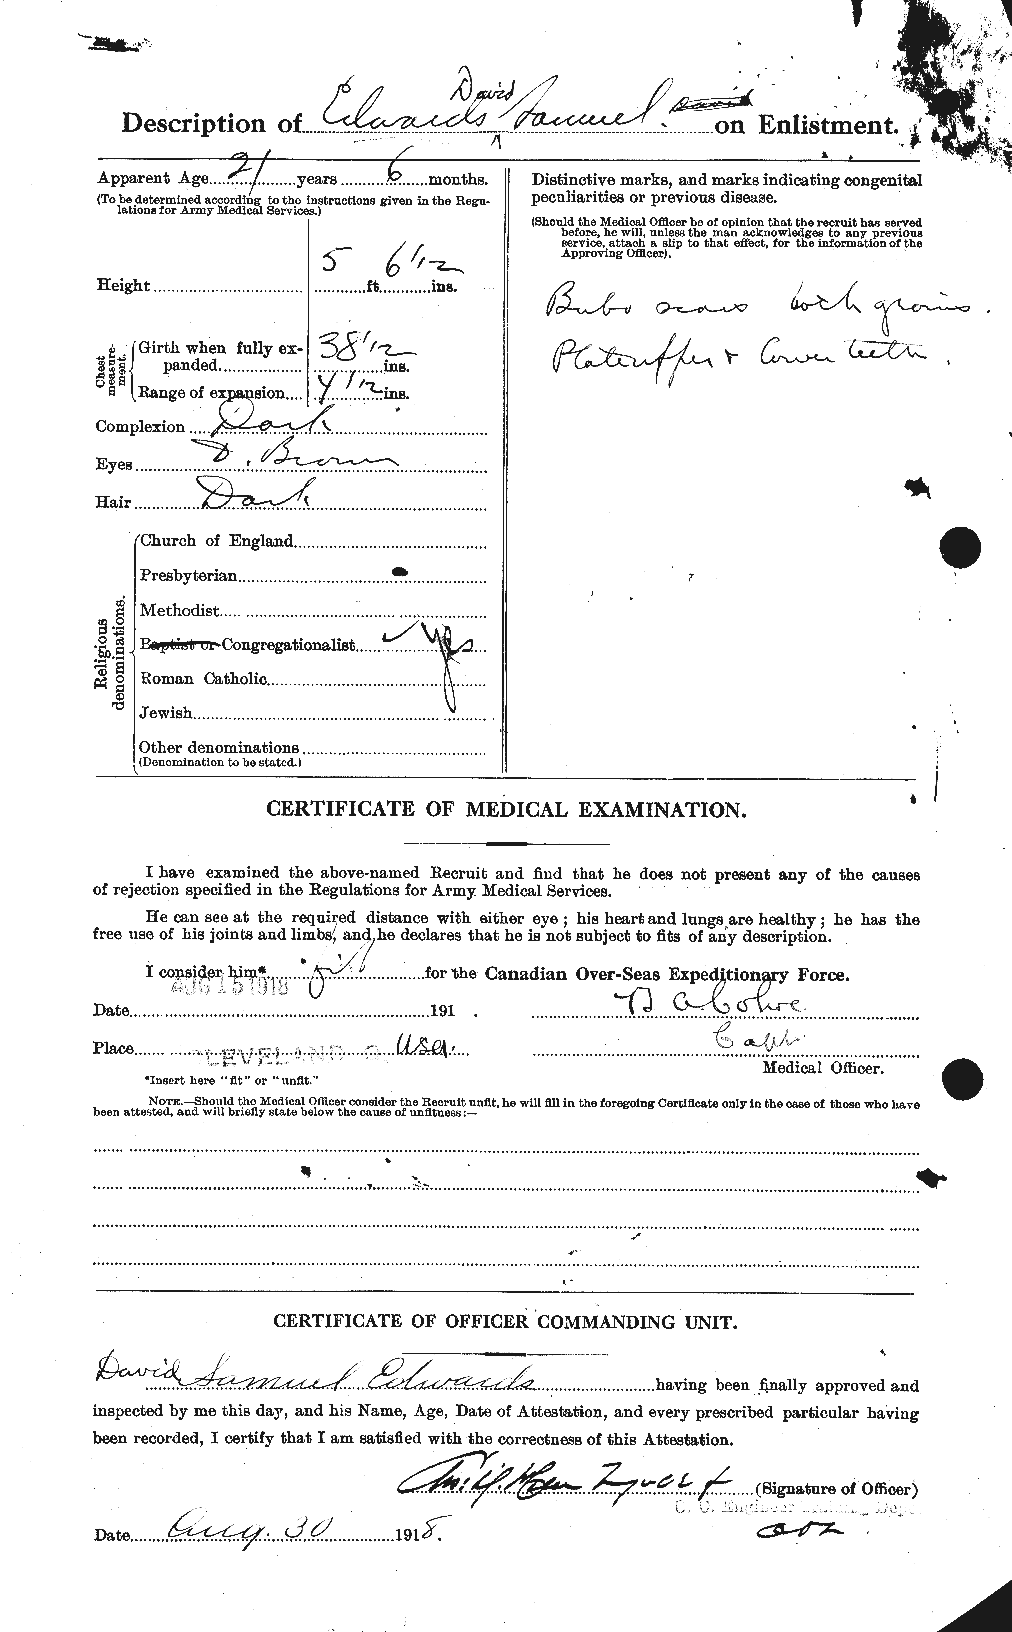 Personnel Records of the First World War - CEF 307882b